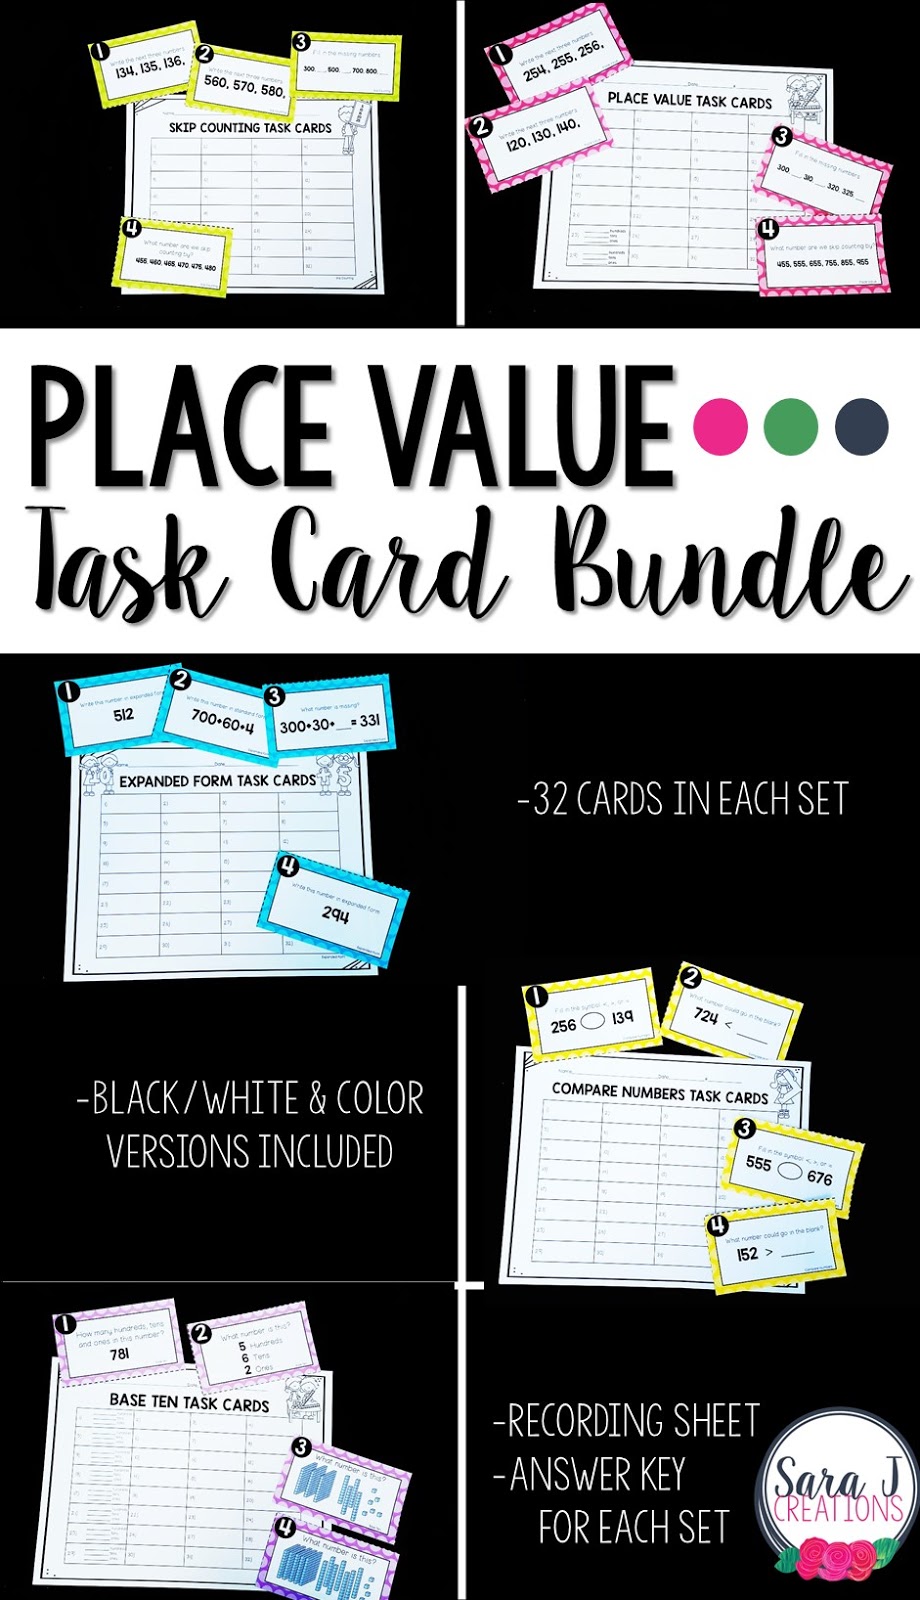 Place Value Task Card Bundle - A great place value activity for second grade.